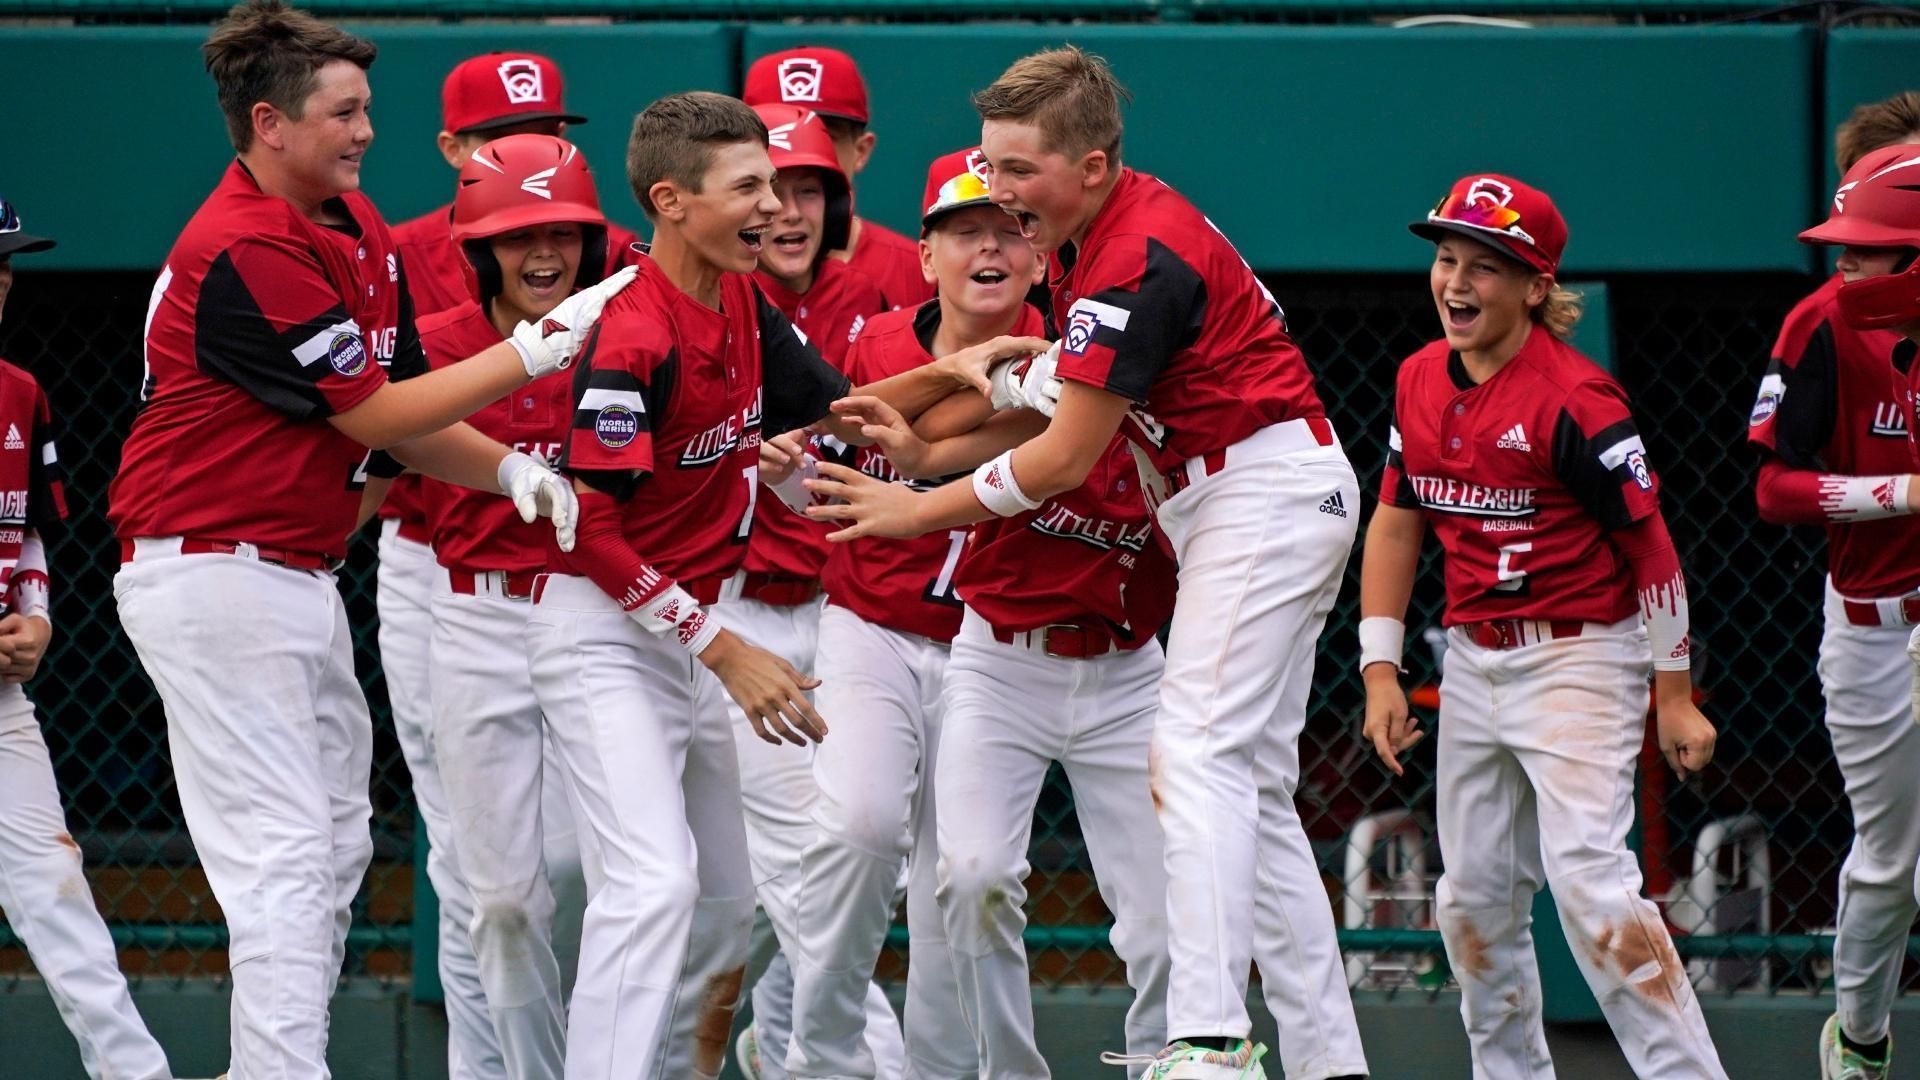 The top moments from Day 1 of the LLWS ESPN Video